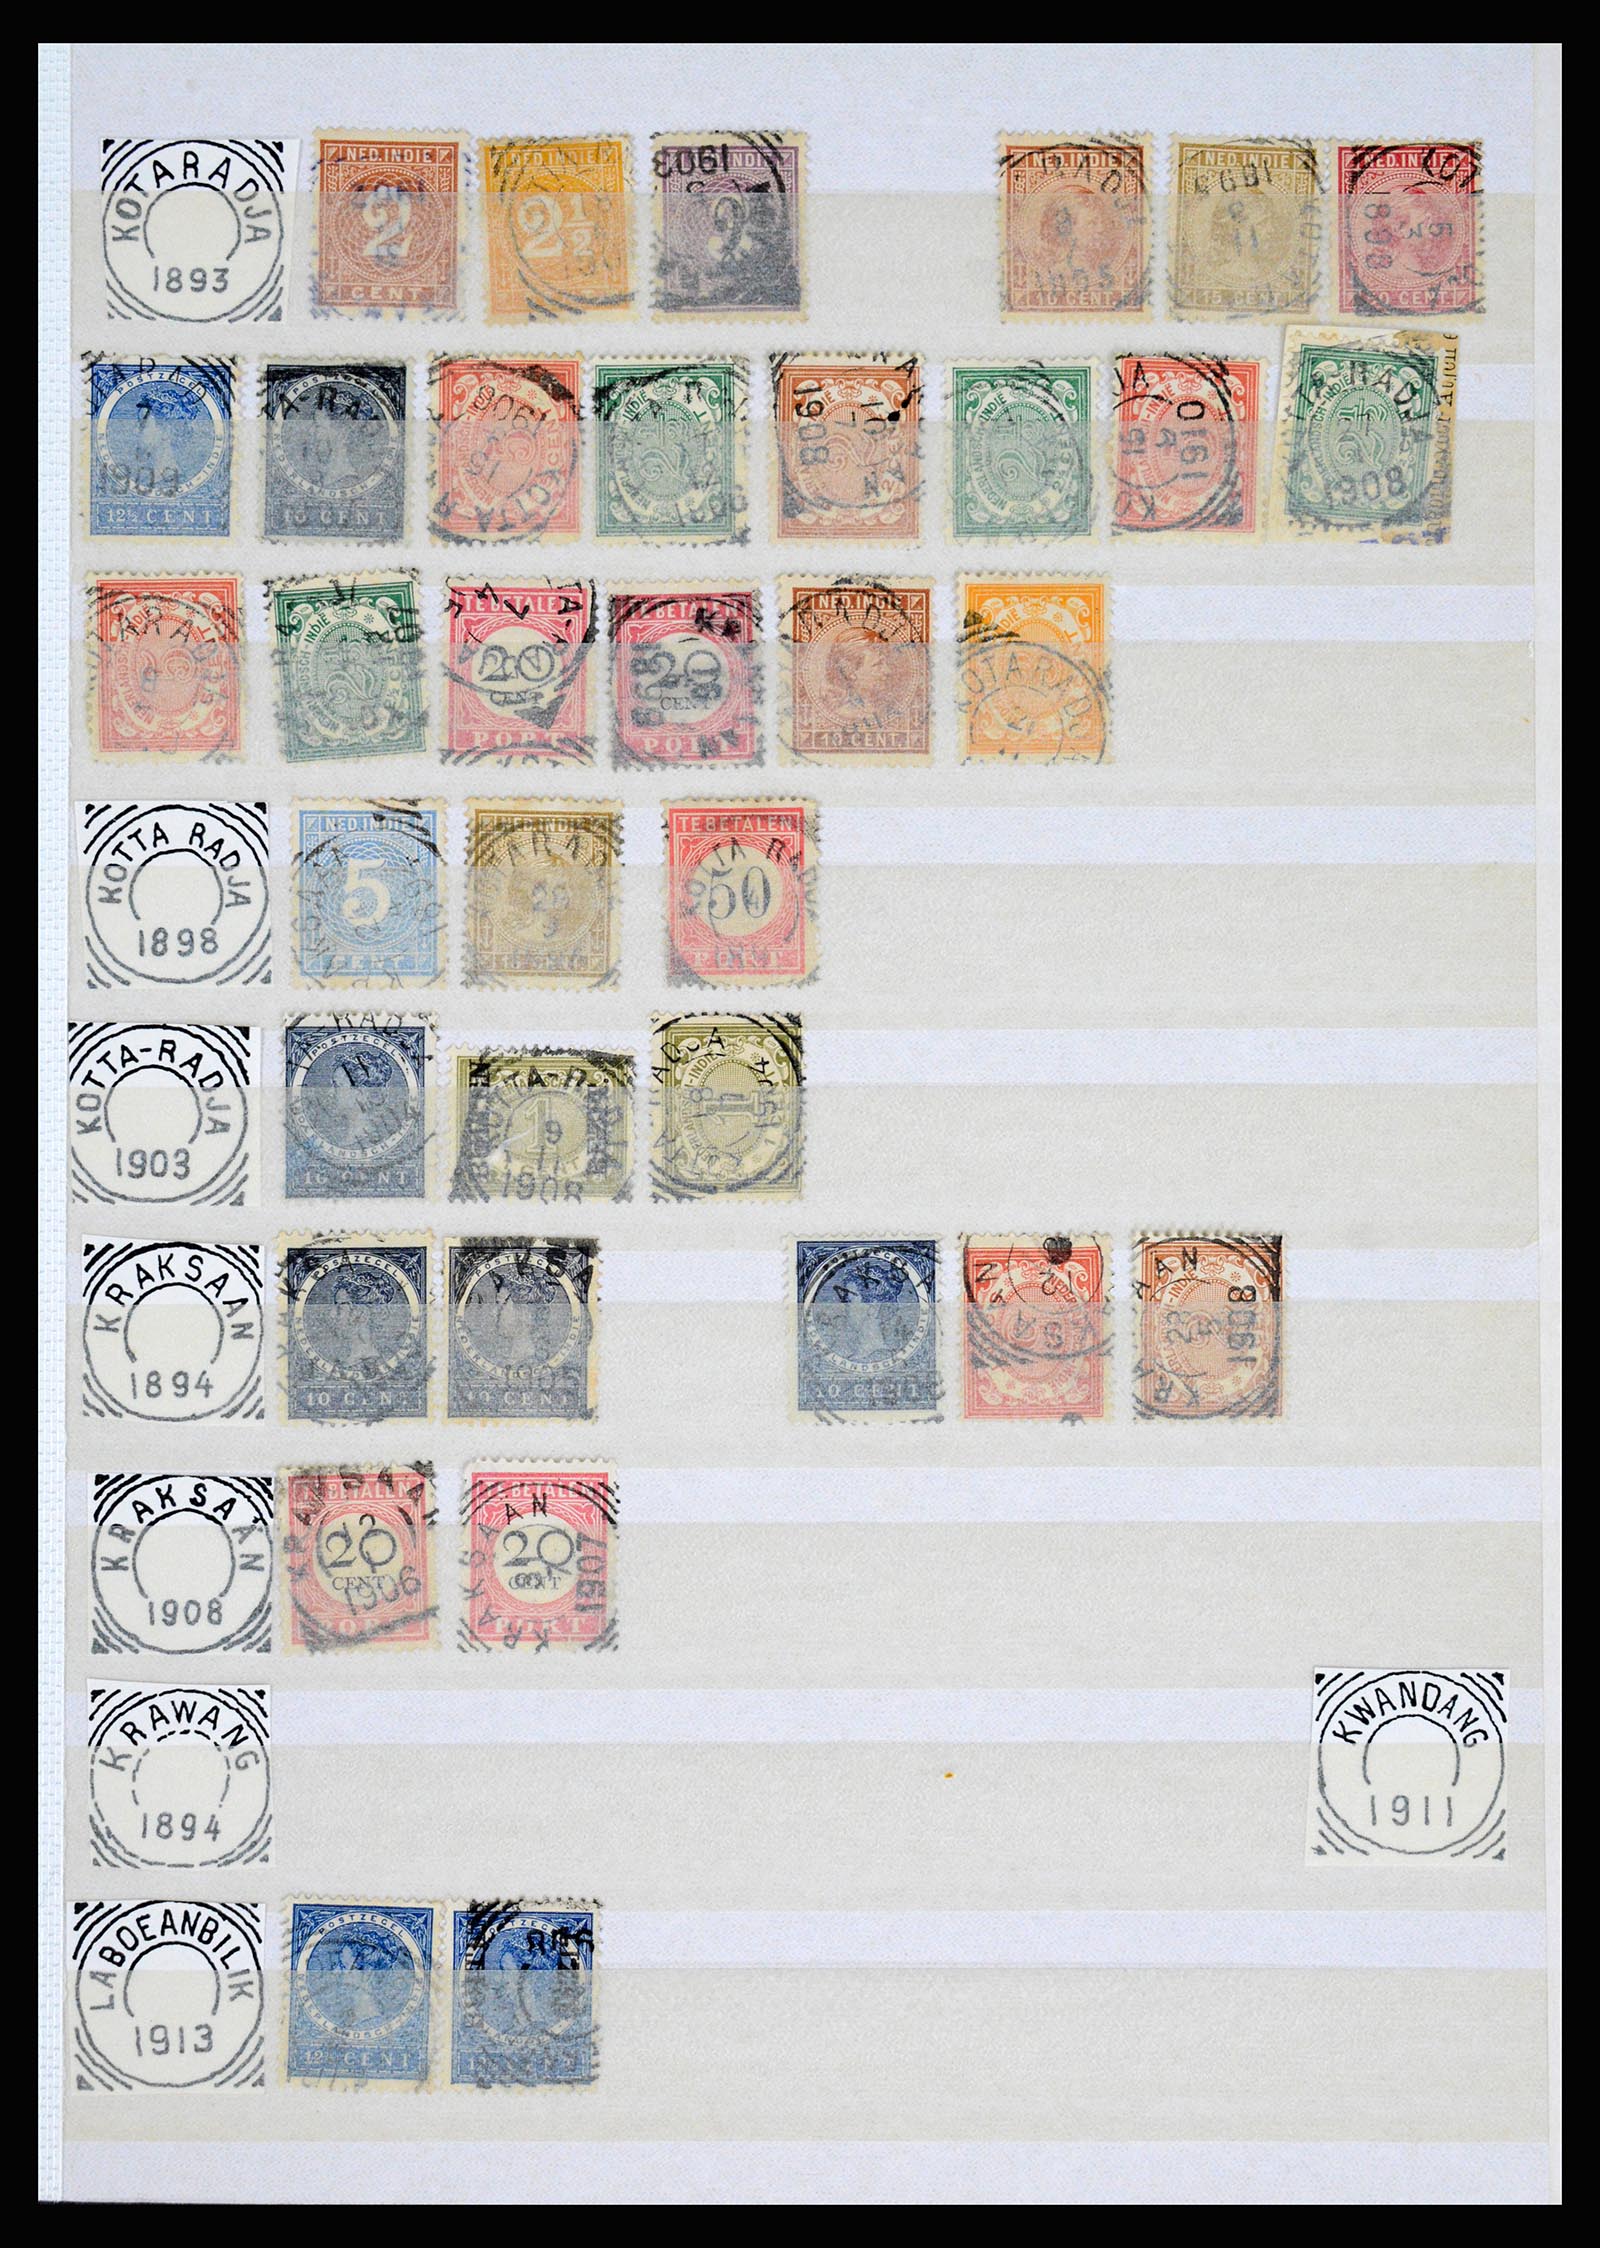 36839 074 - Stamp collection 36839 Dutch east Indies square cancels.